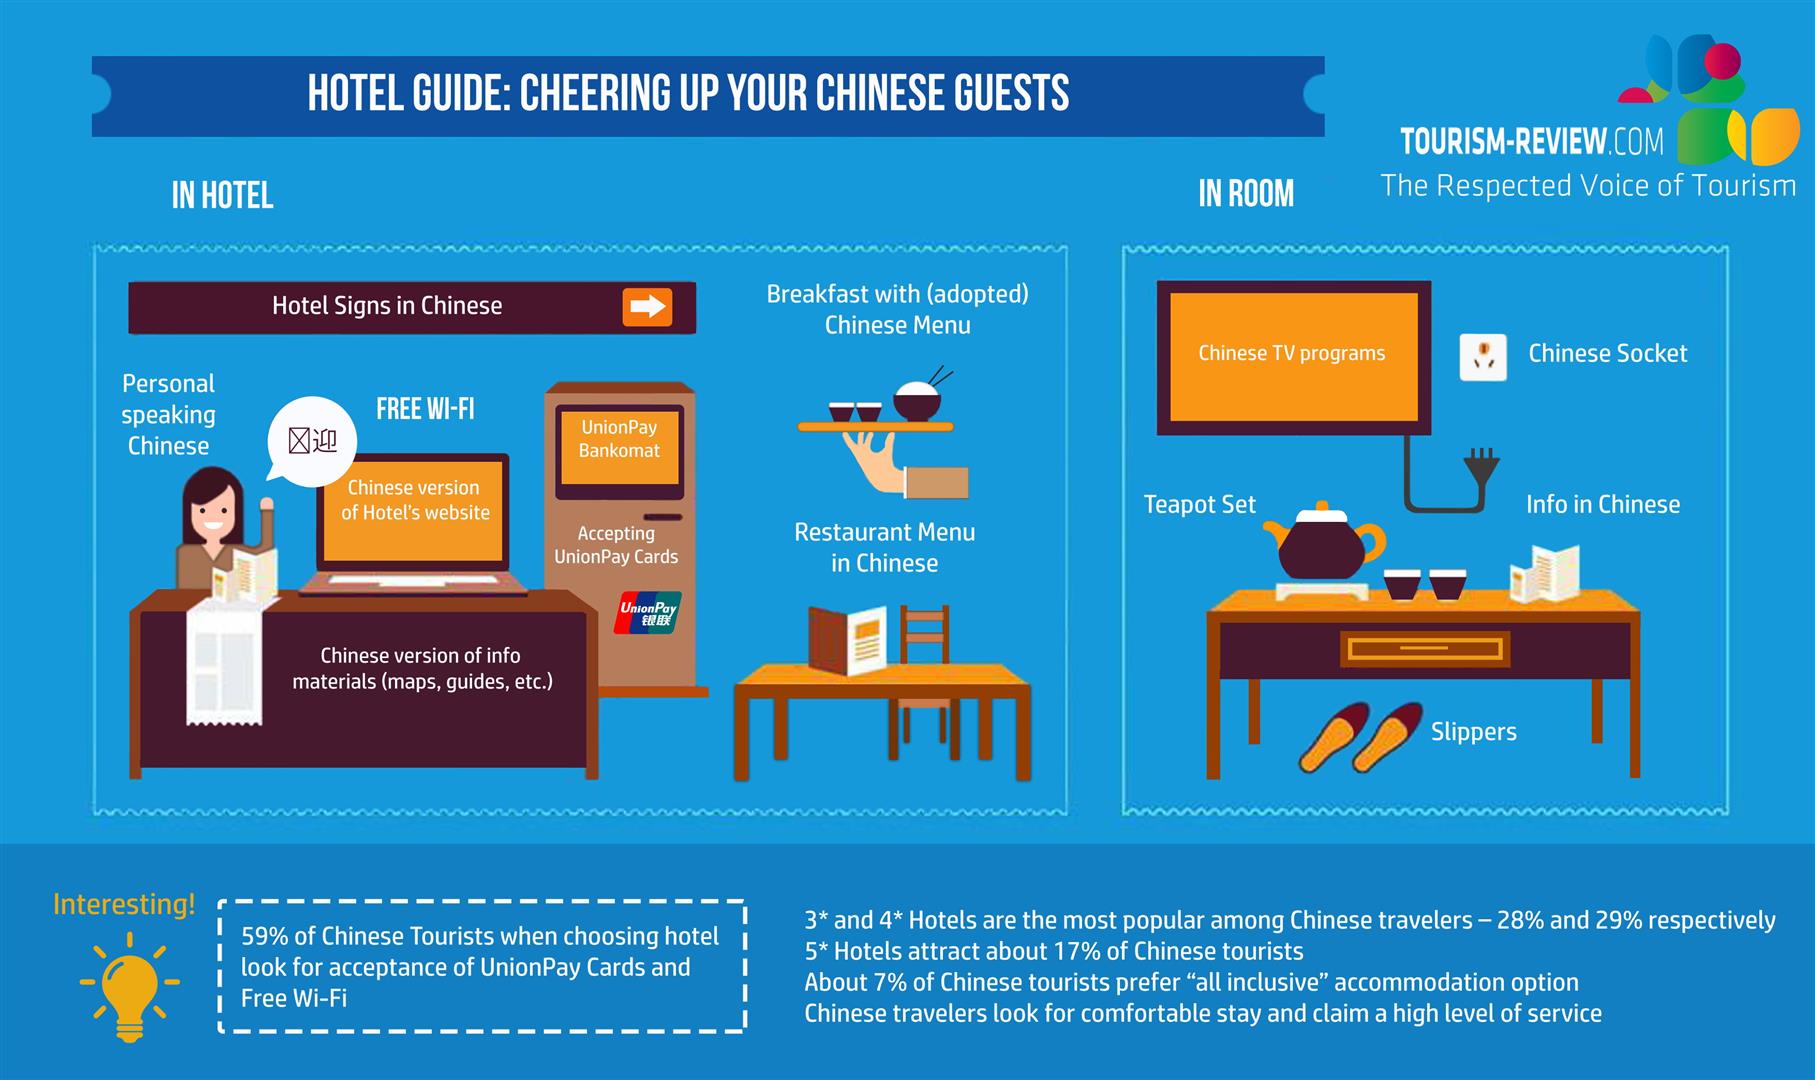 Hotel guide: Cheering up your Chinese guests